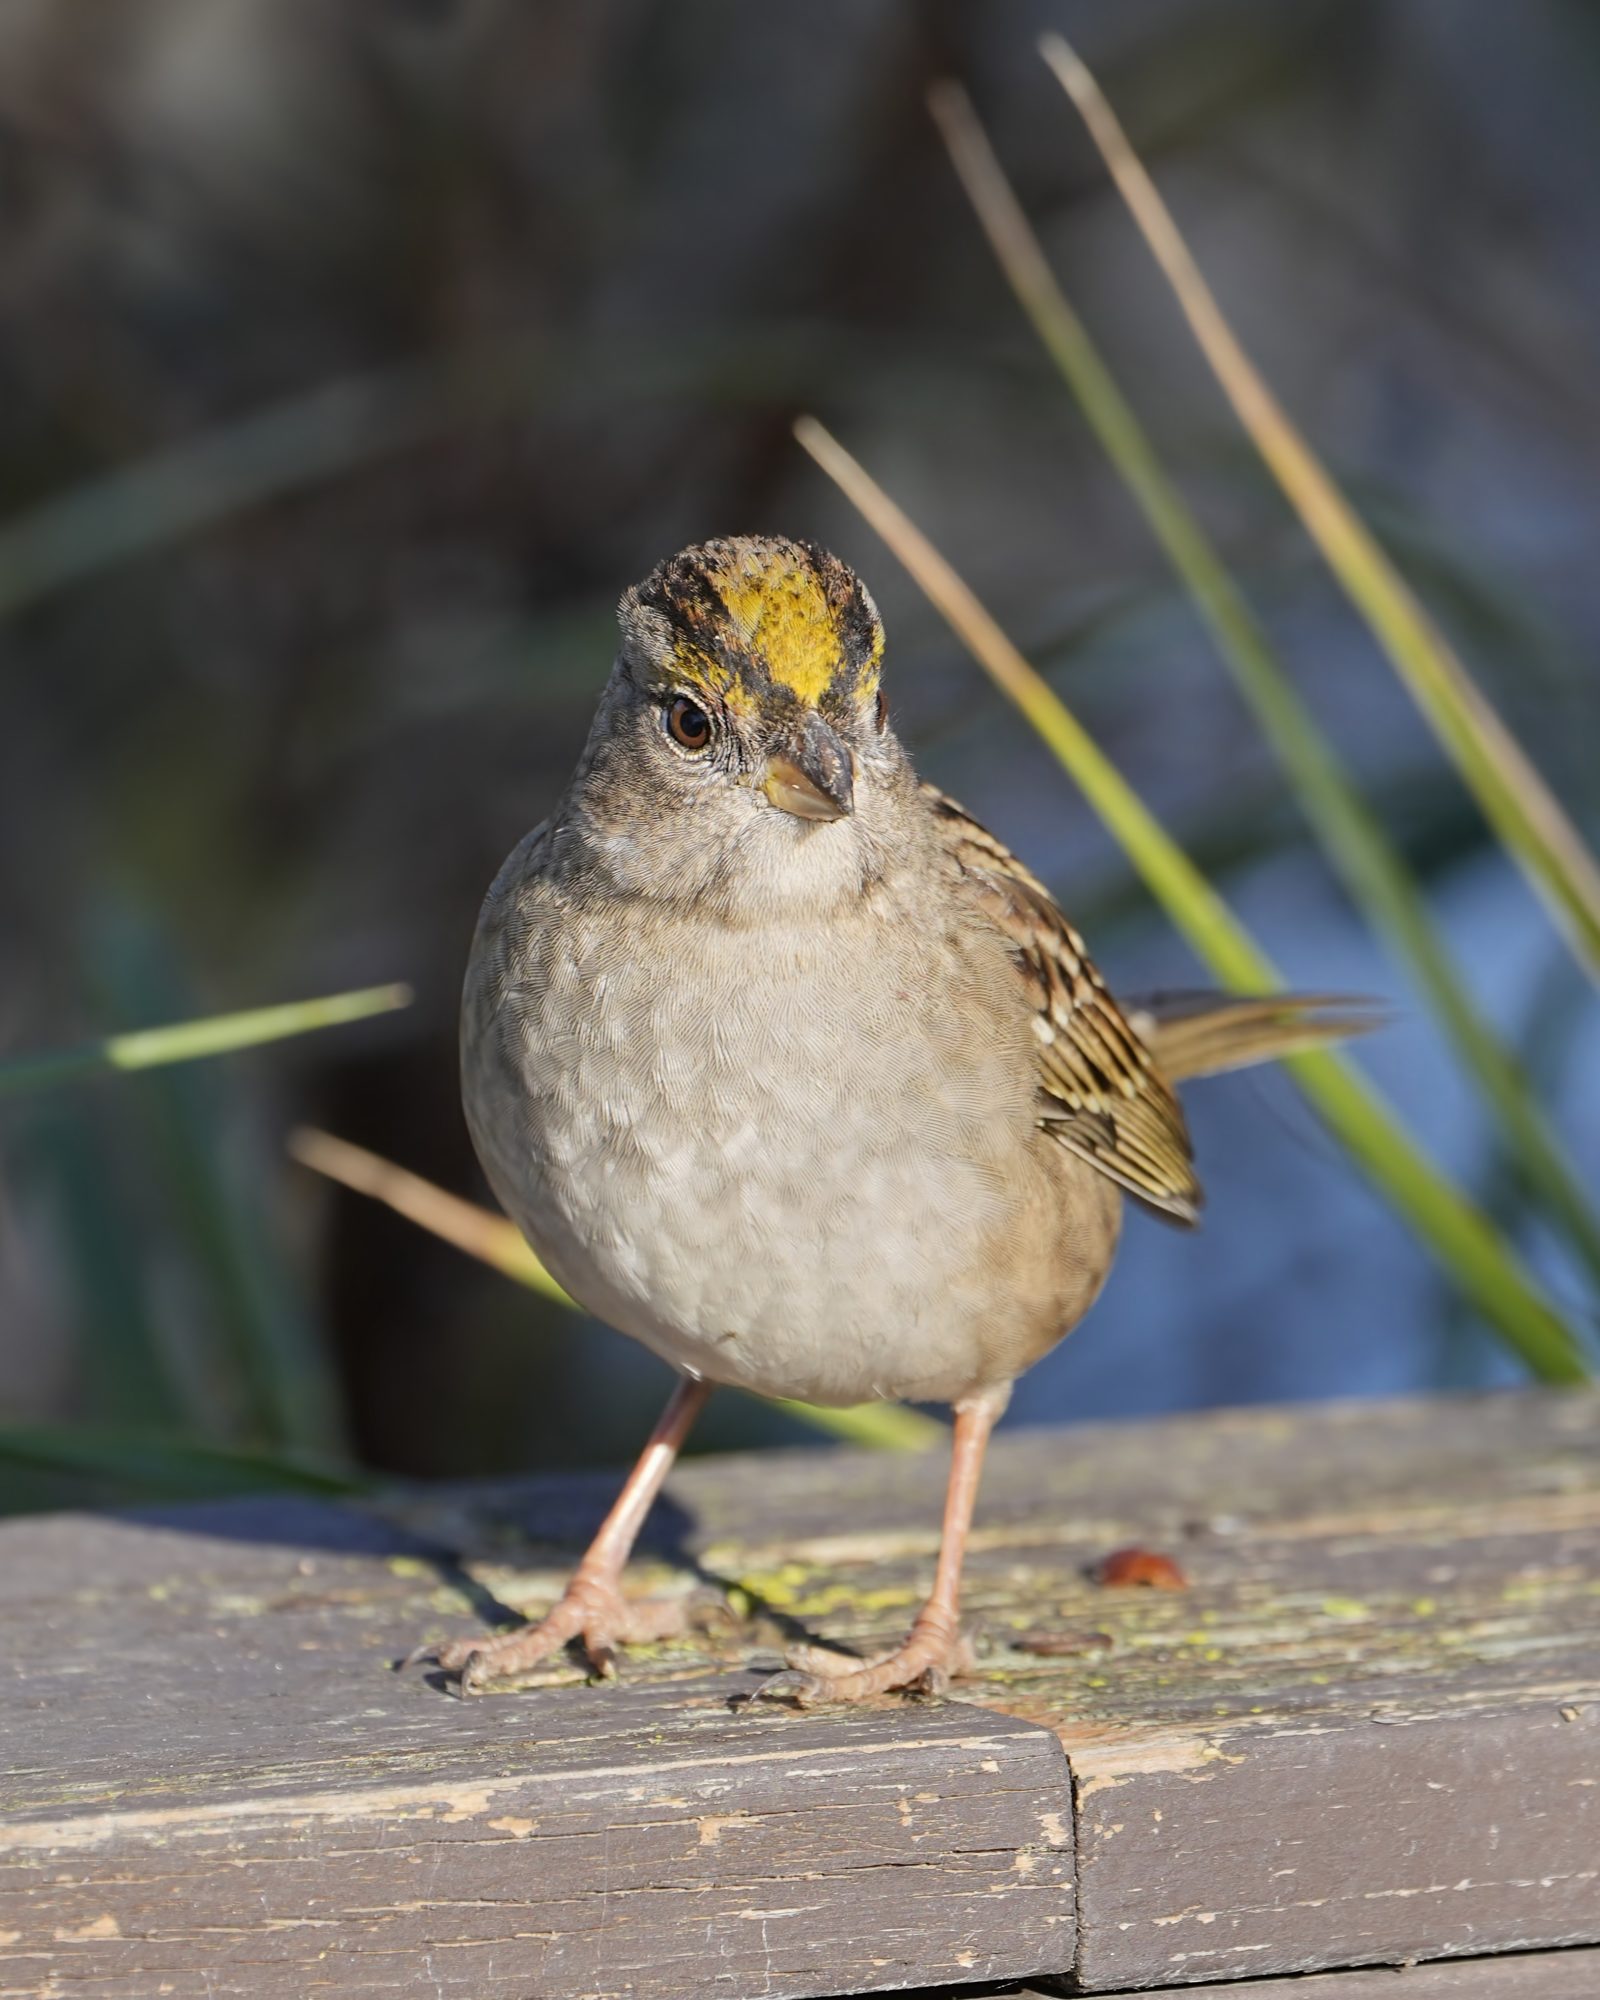 A Golden-crowned Sparrow is standing on a wooden fence